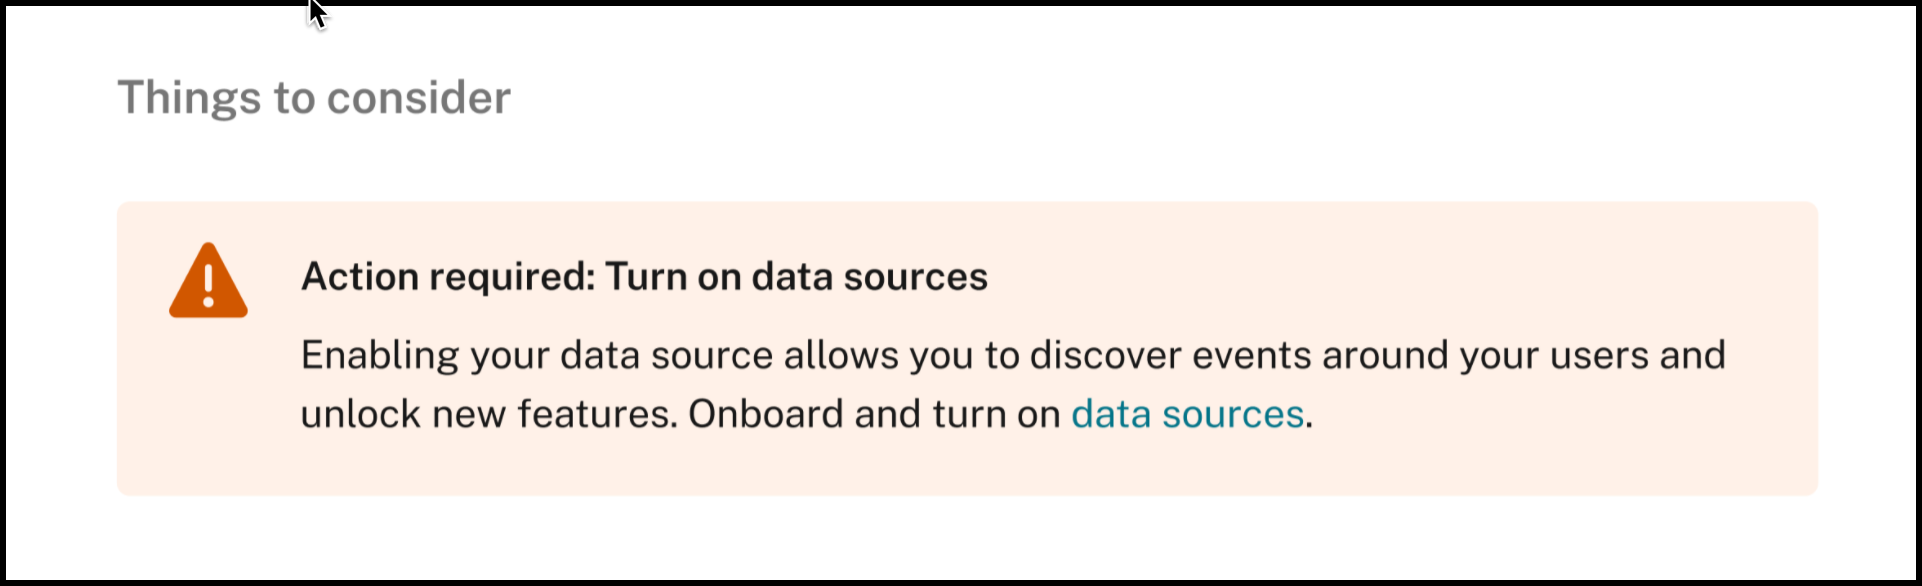 No data sources turned on